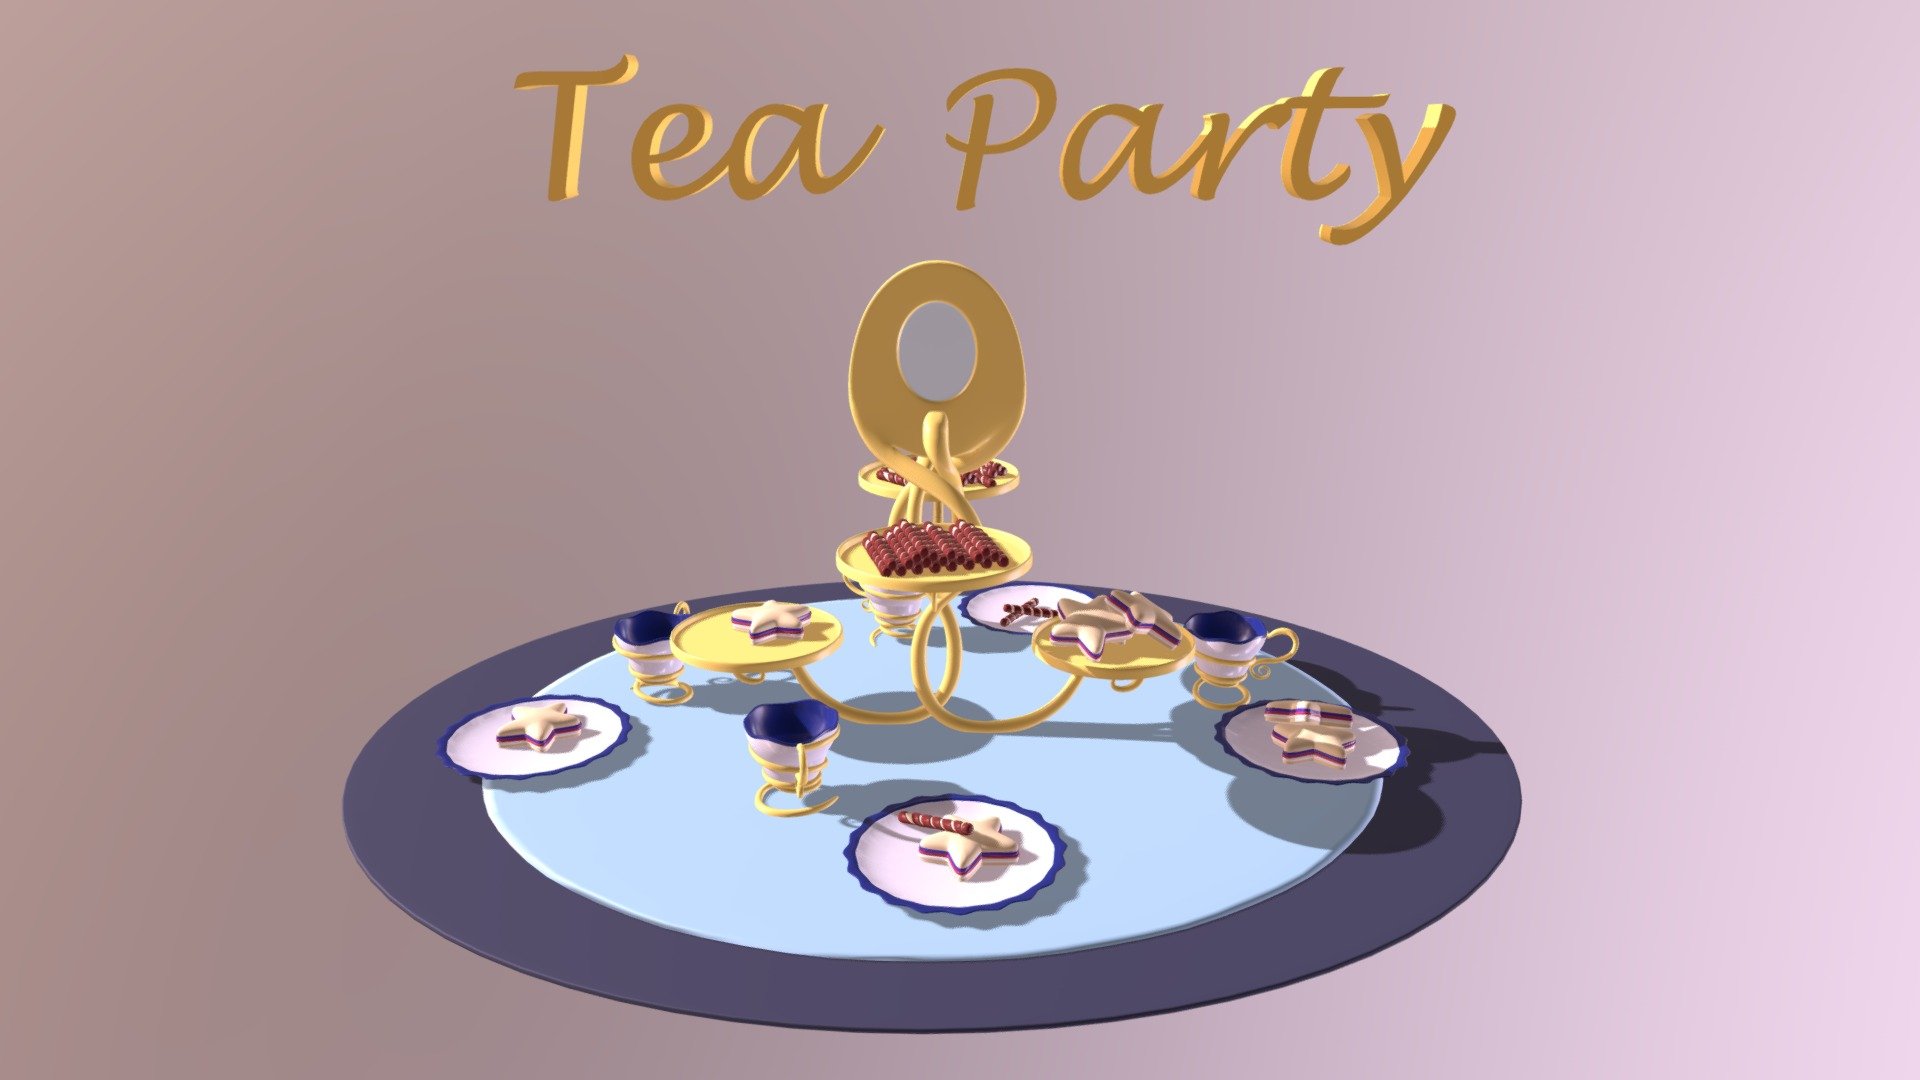 Tea Party Assignment: 2 organic and 3 constructed pieces, table with cloth and &ldquo;Tea Party